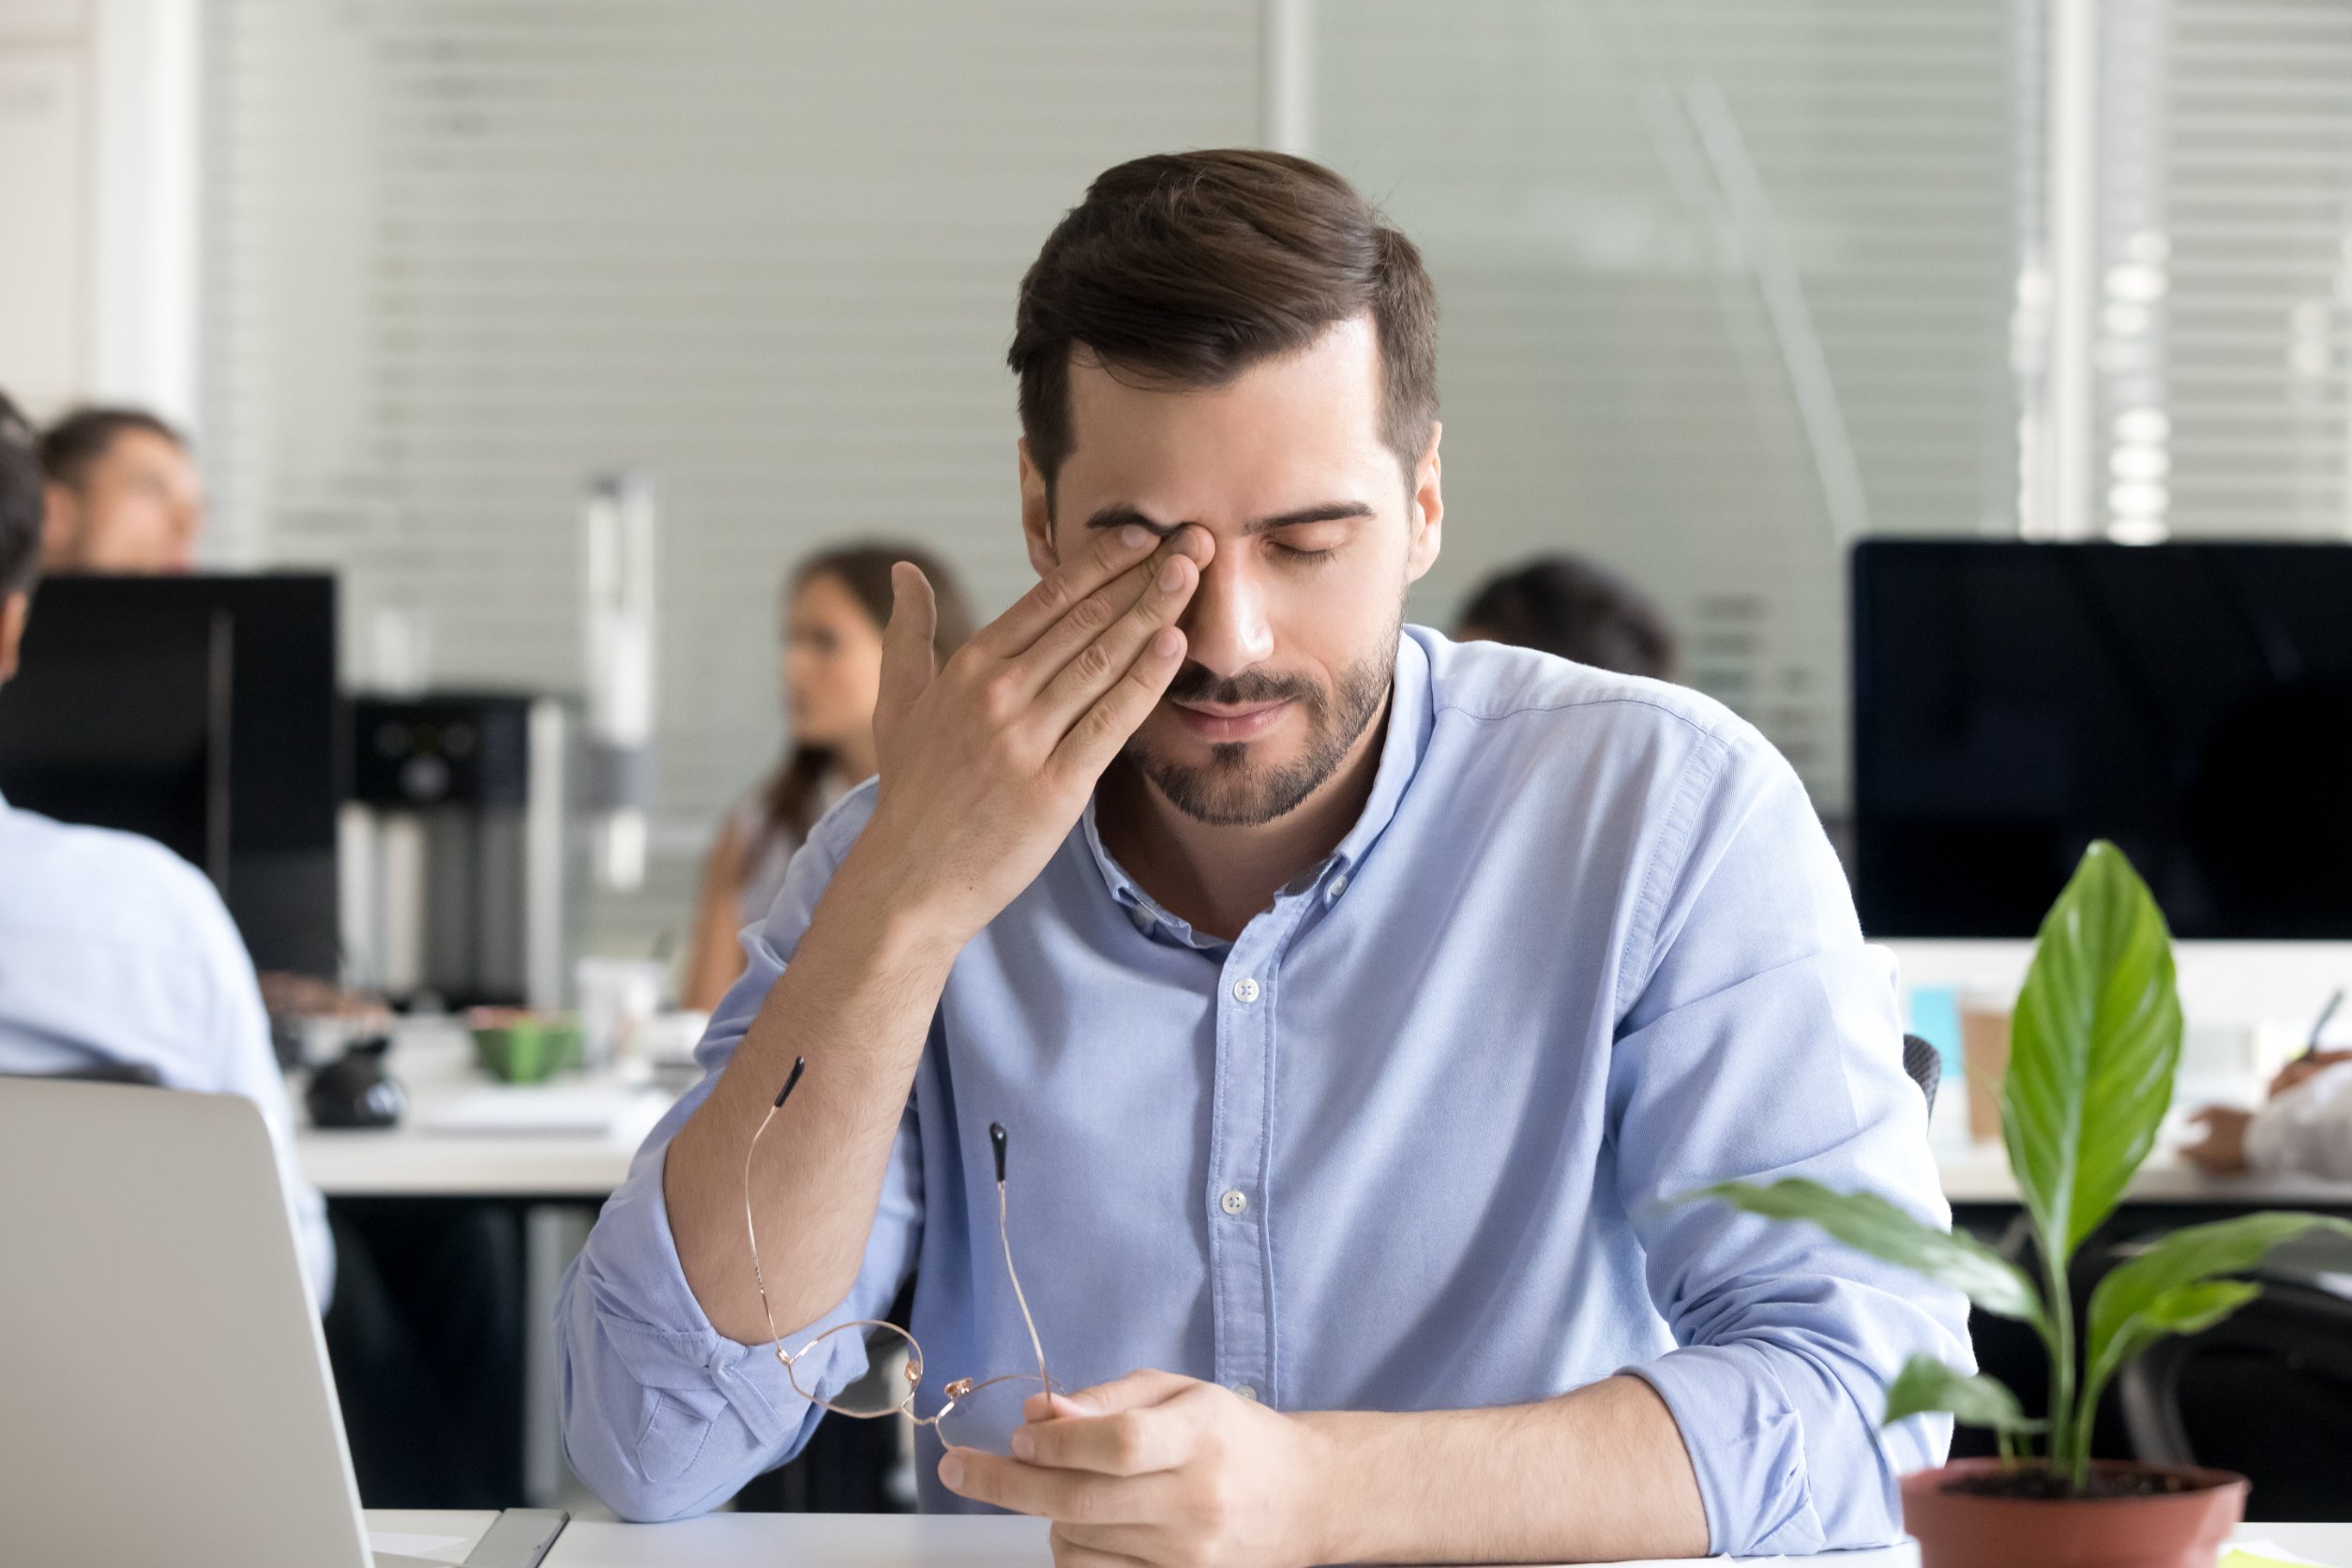 How to Manage Dry Eye Disease Flare-Ups